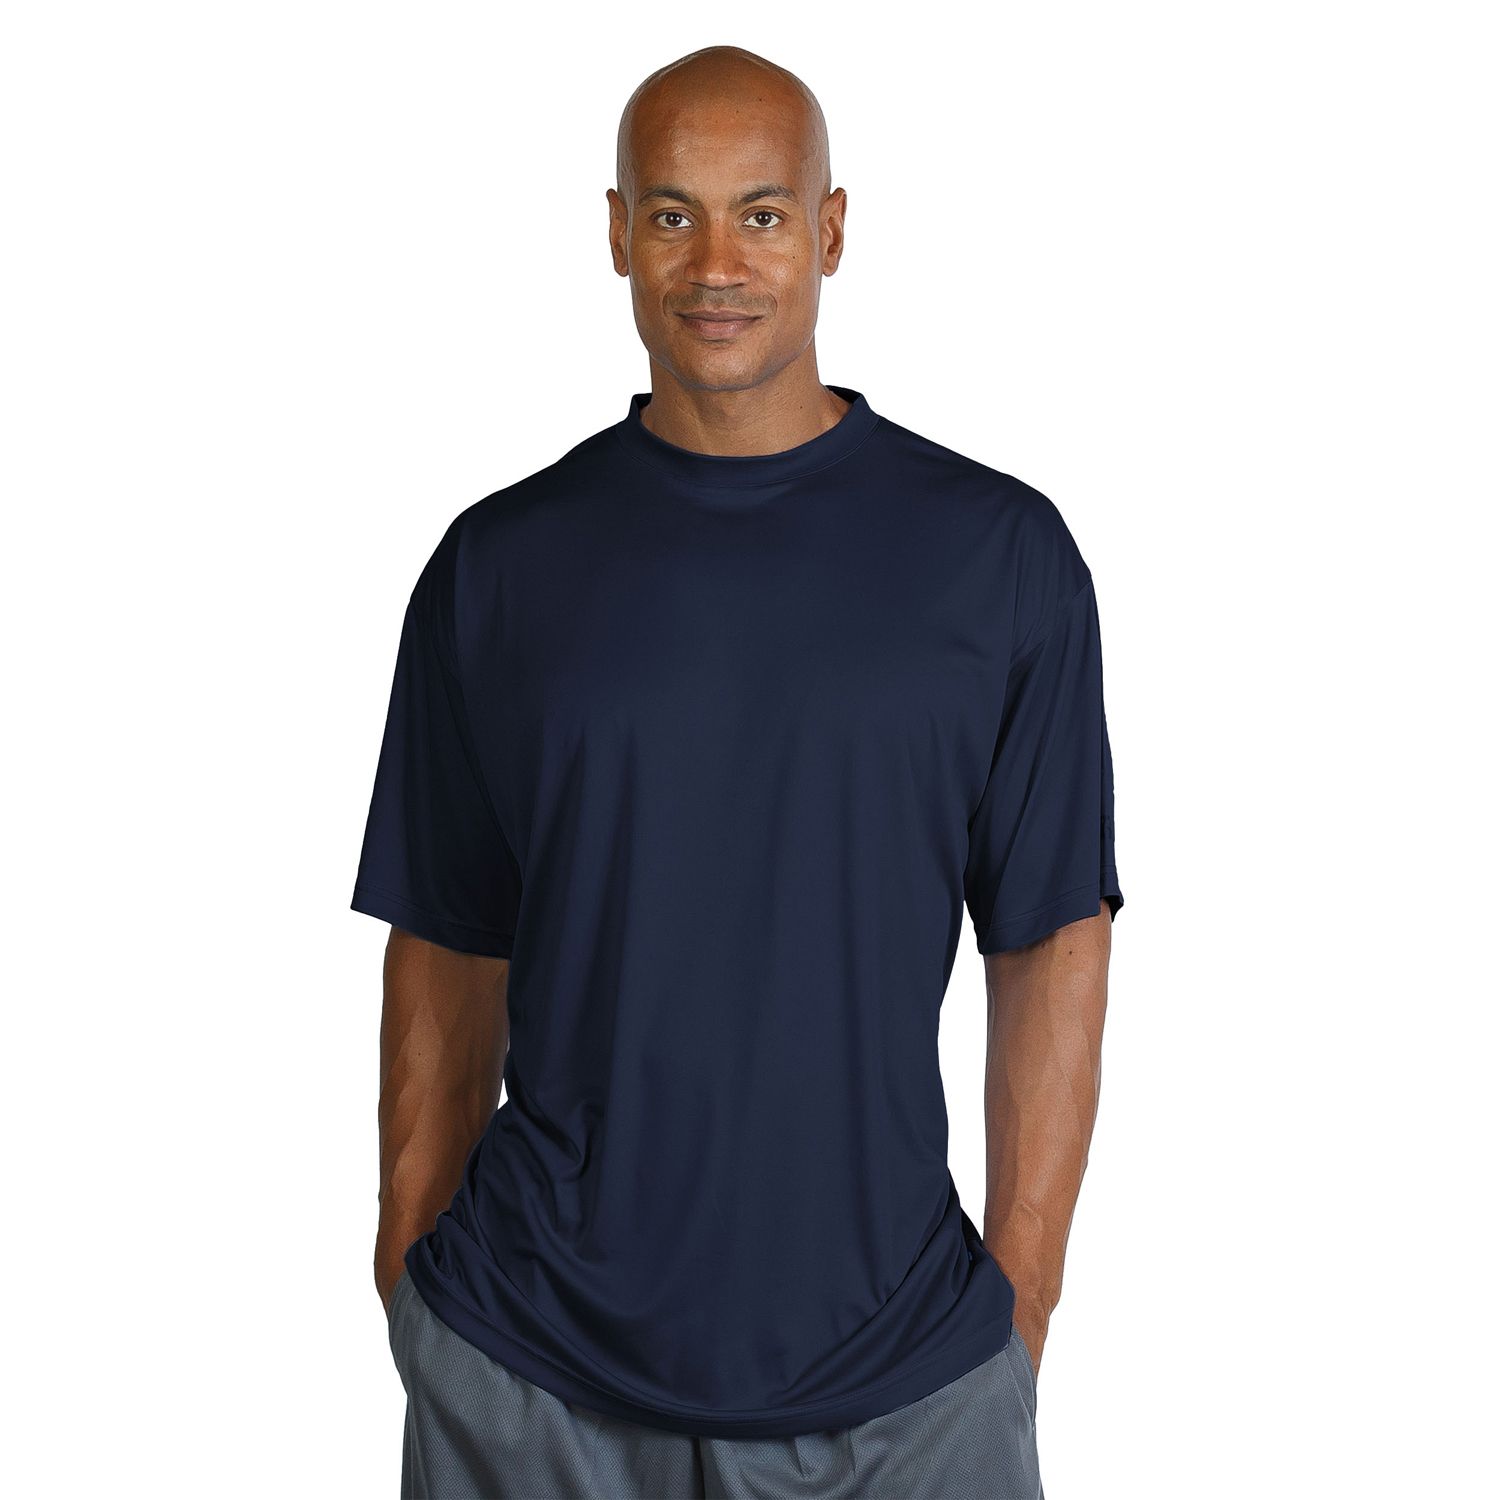 russell athletic dri fit shirts